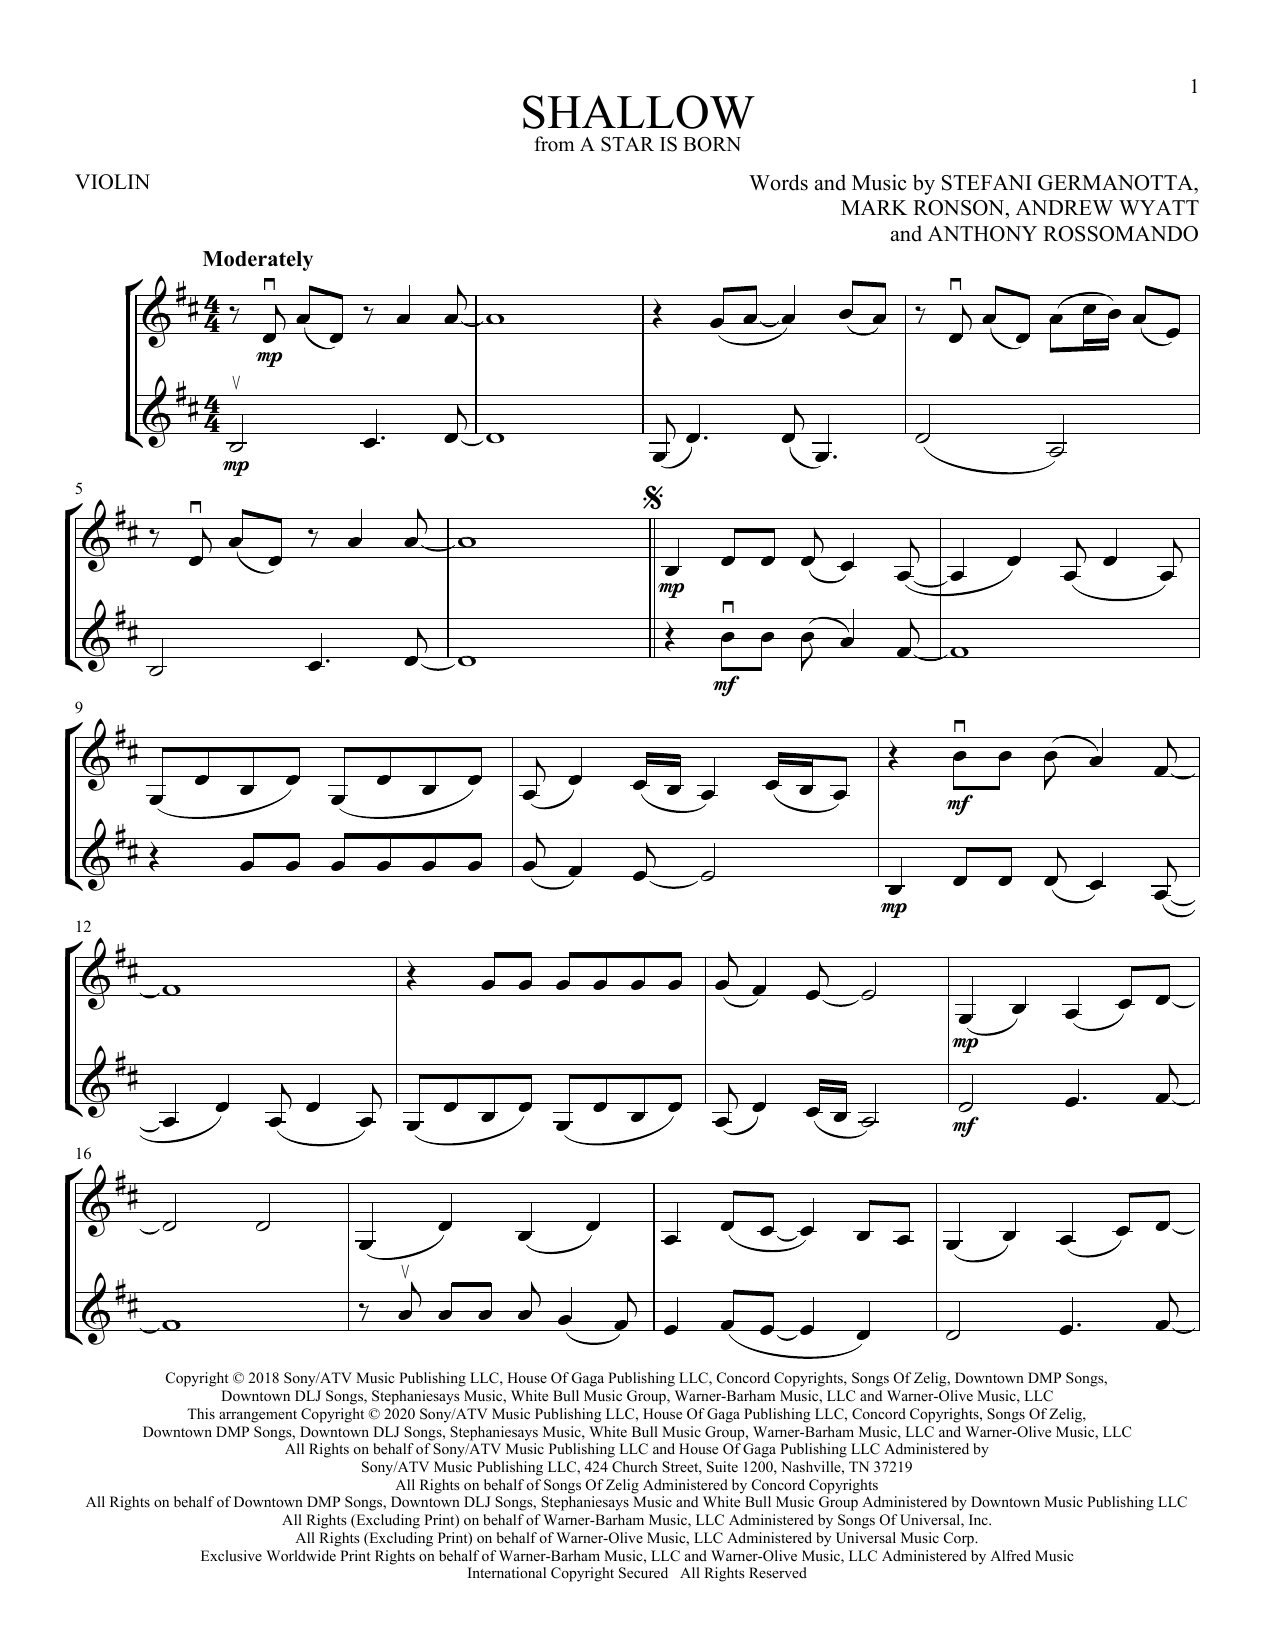 Download Lady Gaga Shallow (from A Star Is Born) Sheet Music